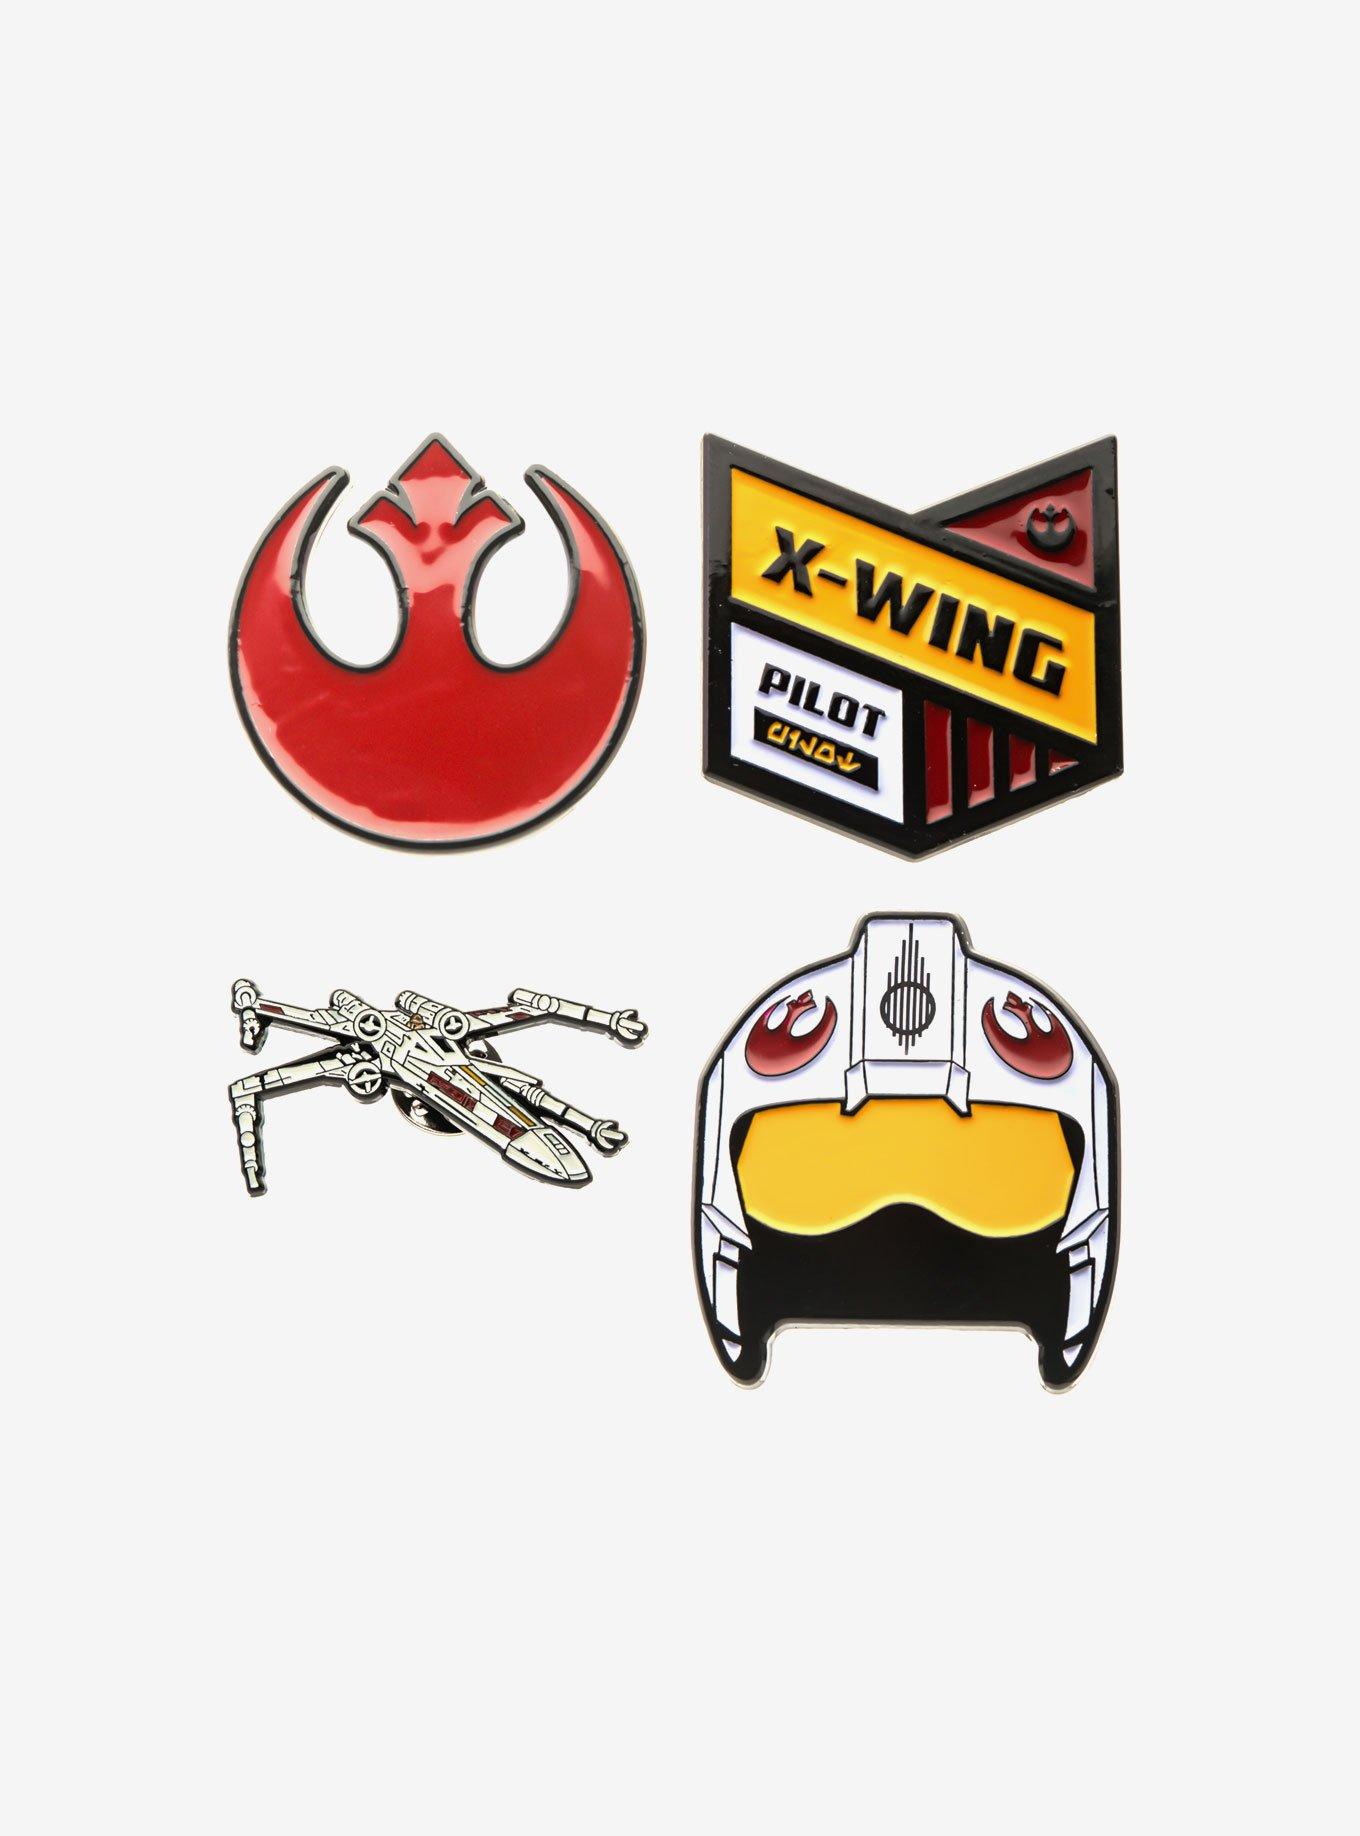 Star Wars Rebel Alliance and X-Wing Fighter Pin Set